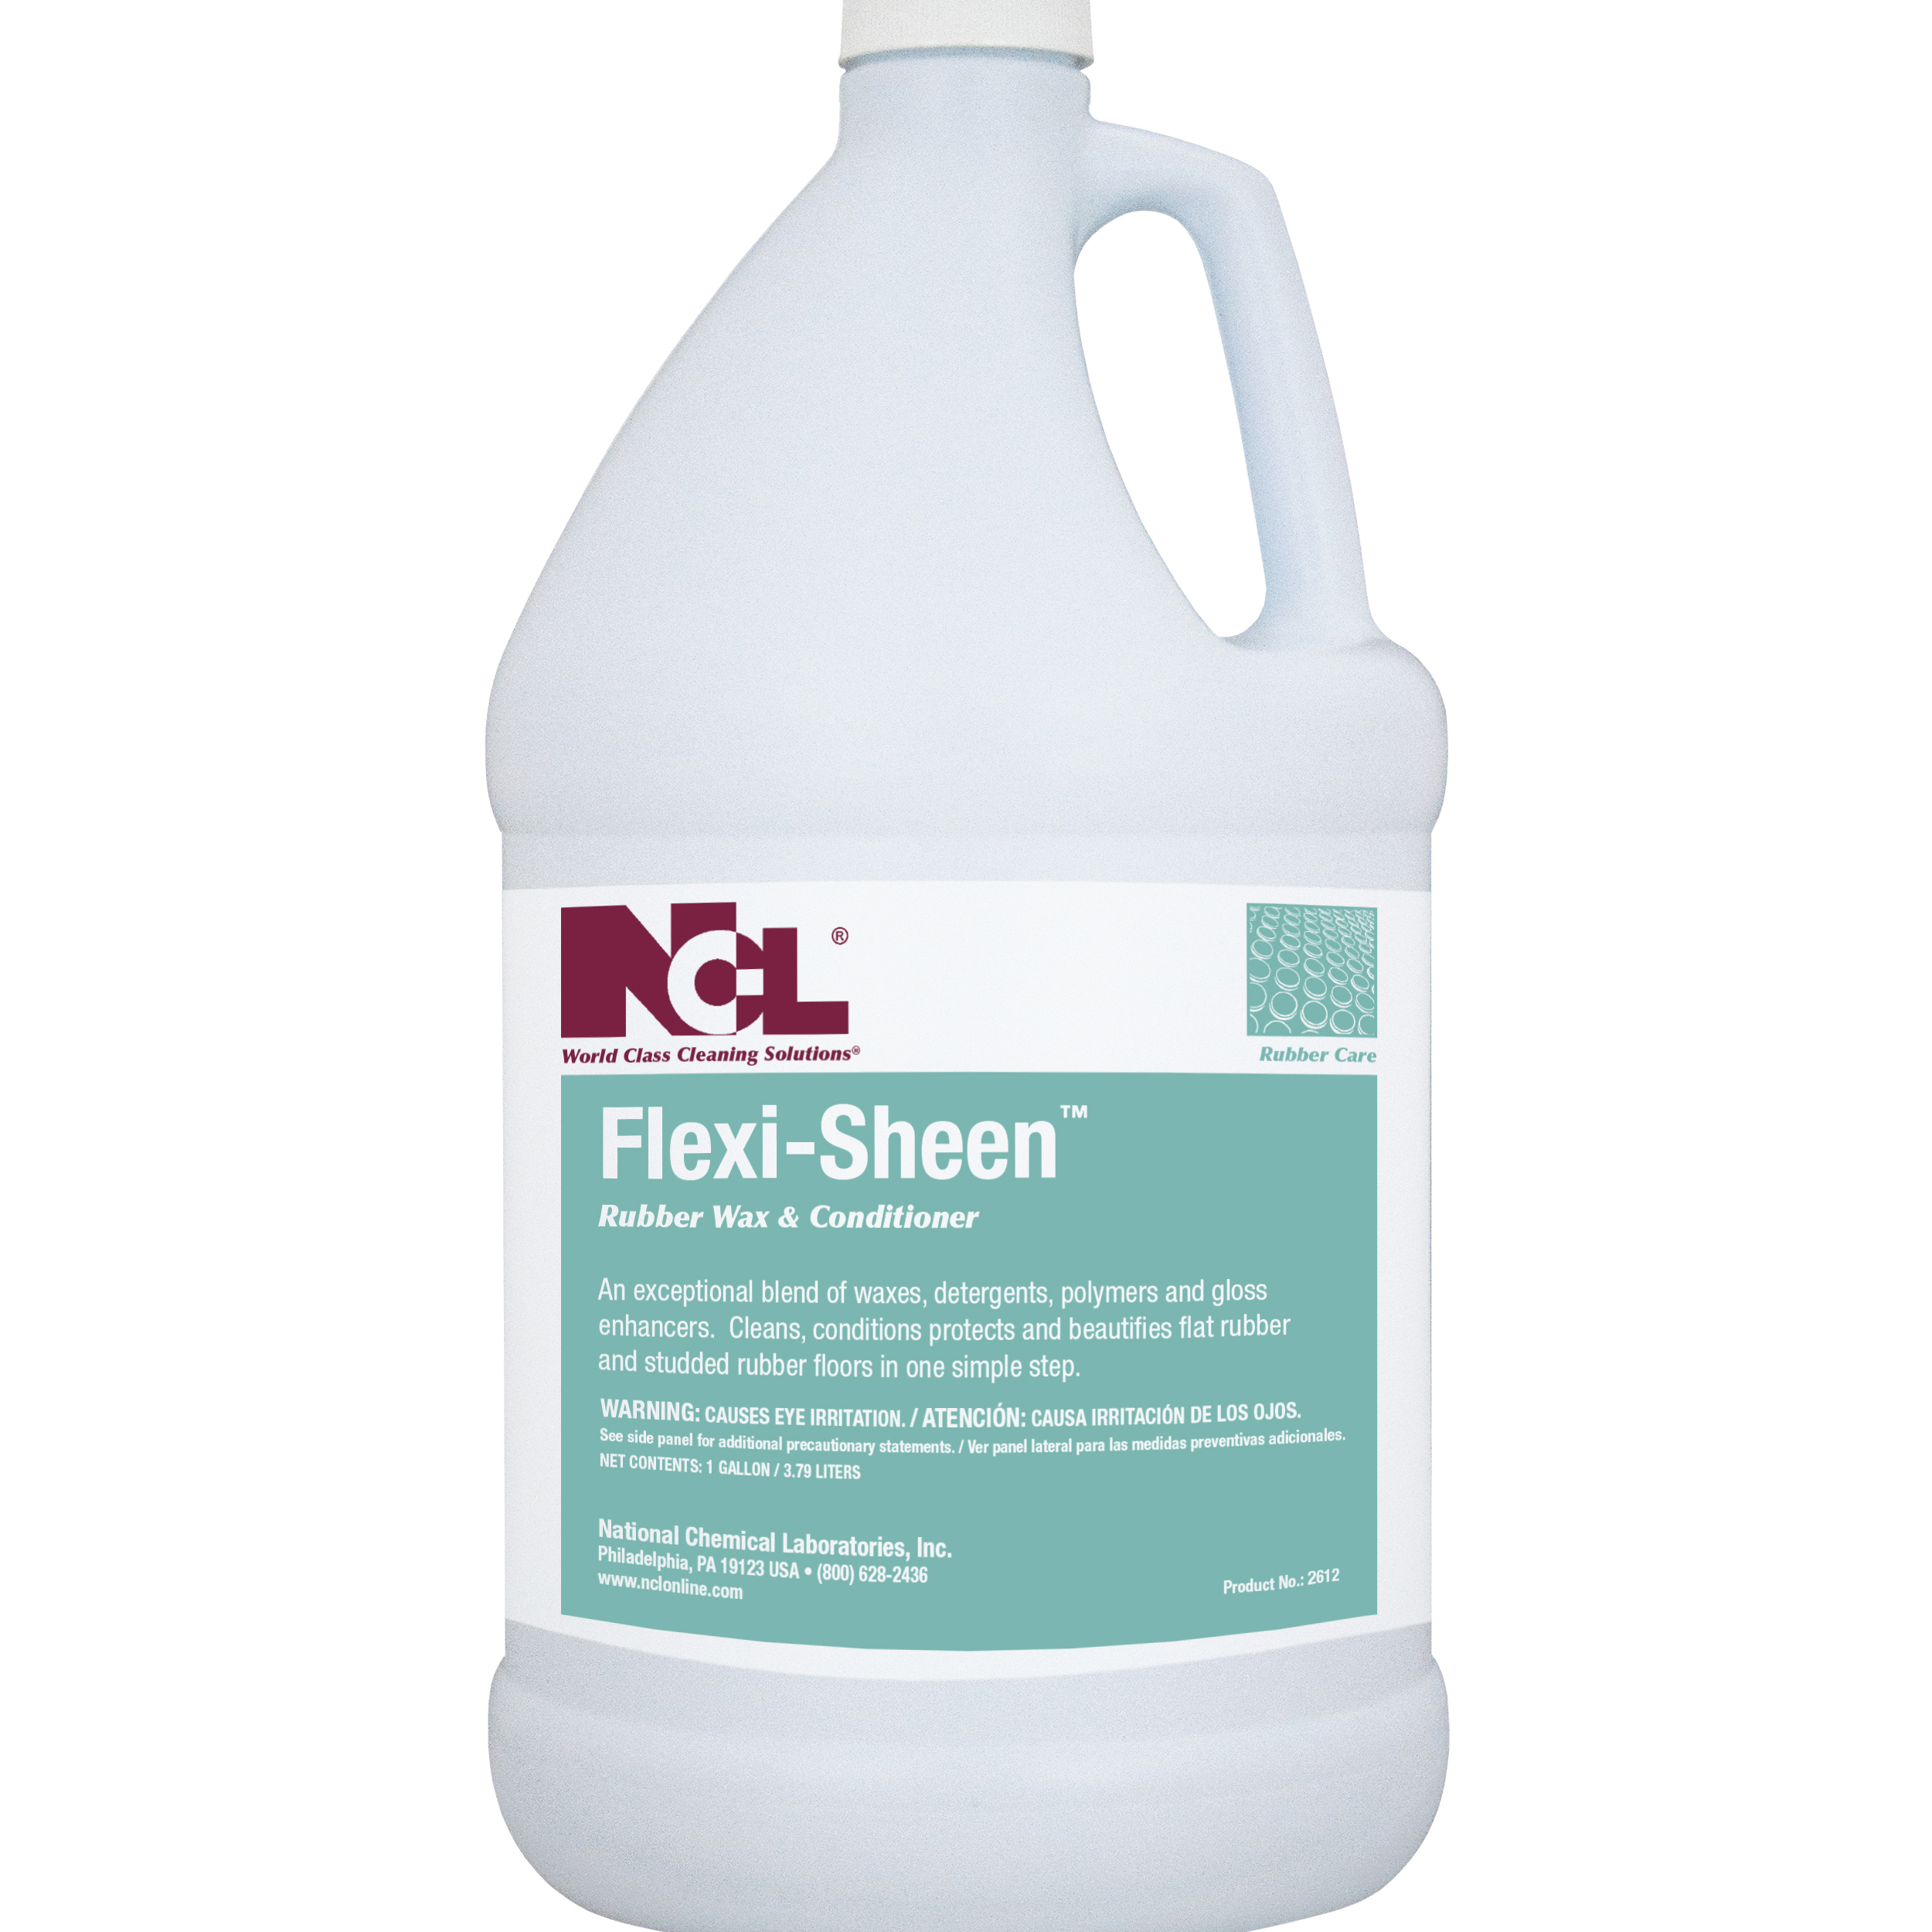  FLEXI-SHEEN Rubber Wax and Conditioner 4/1 Gal. Case (NCL2612-29) 